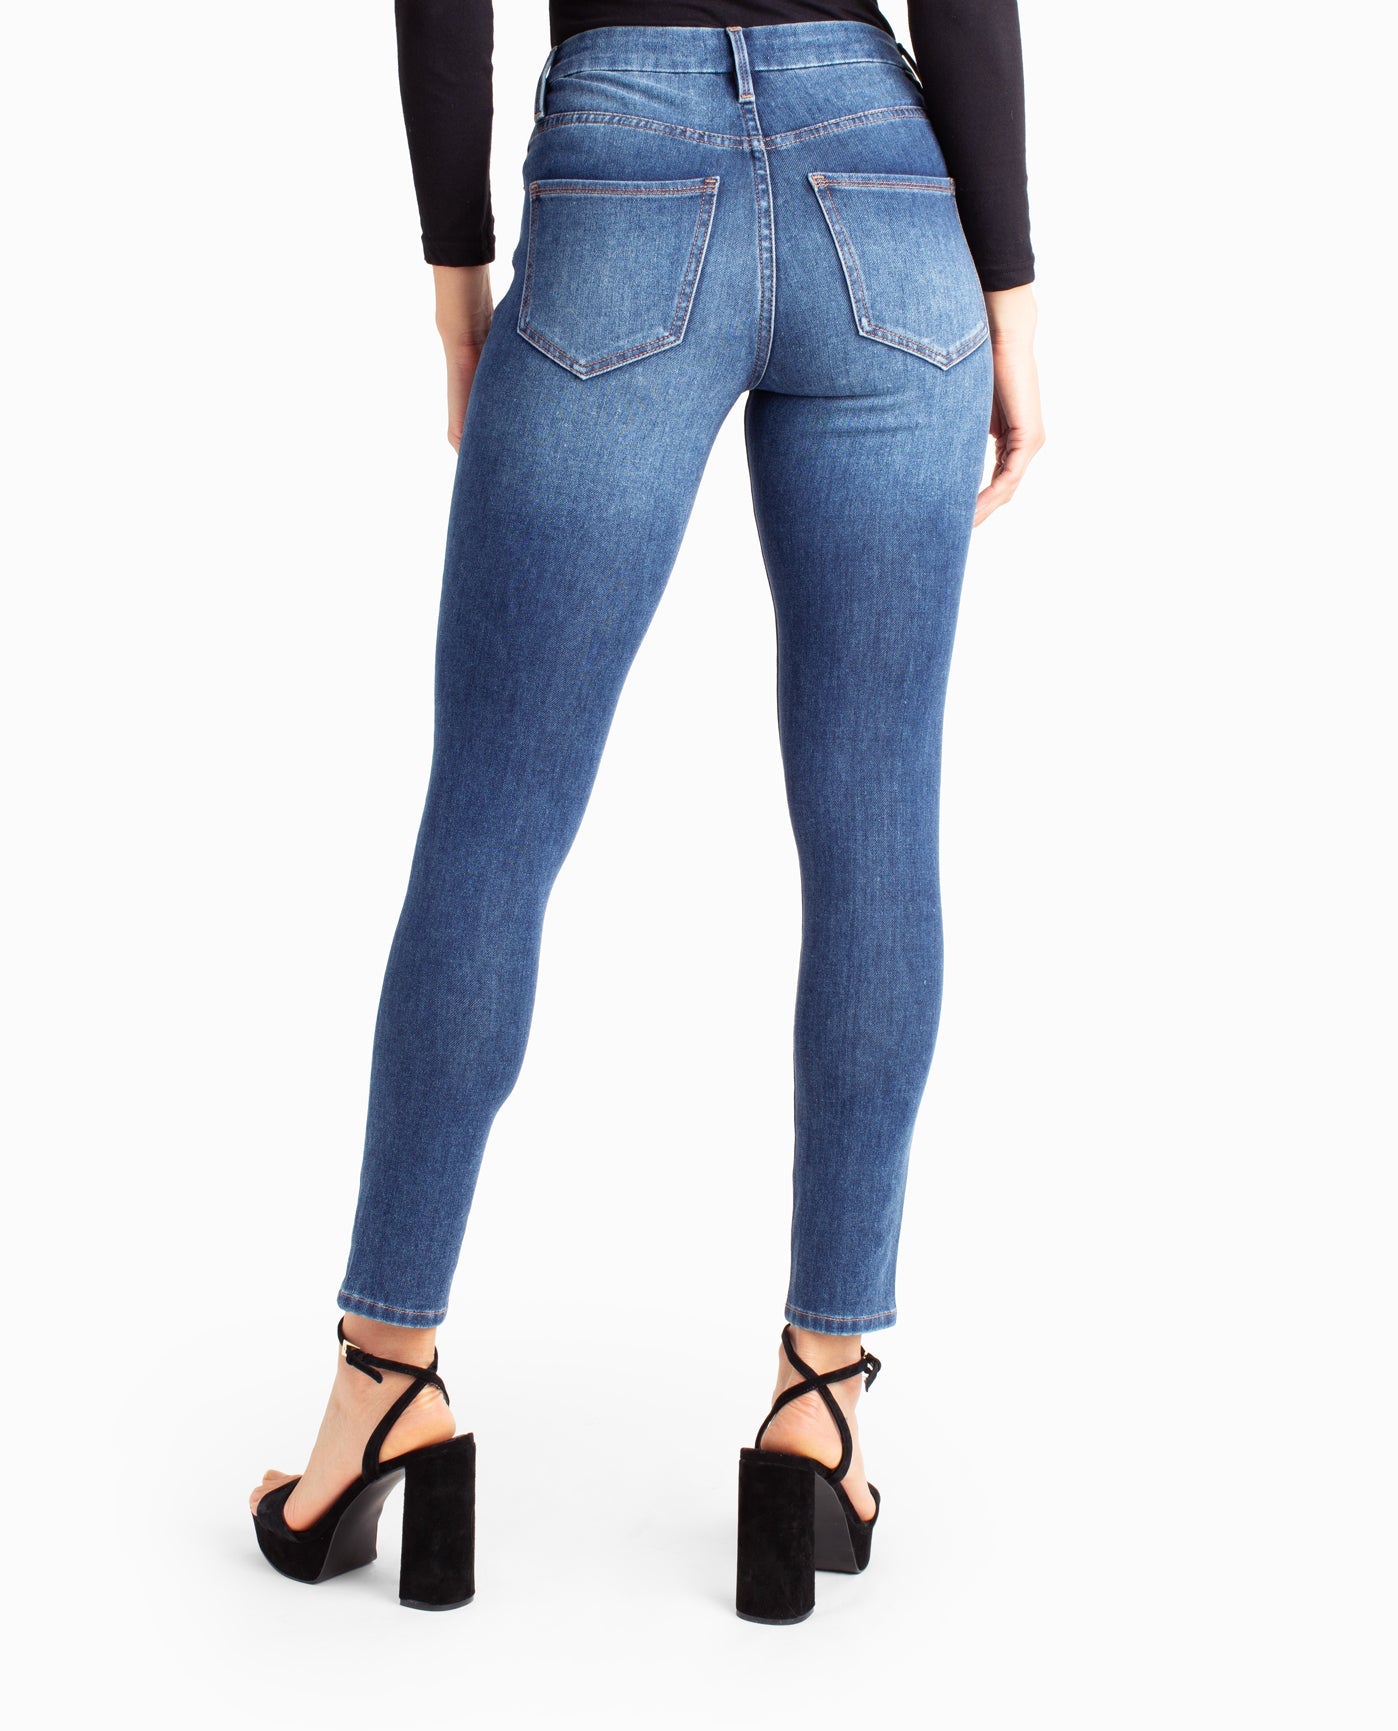 LO-126 INK HIGH WAISTED SKINNY DENIM JEANS - LOVER BRAND FASHION